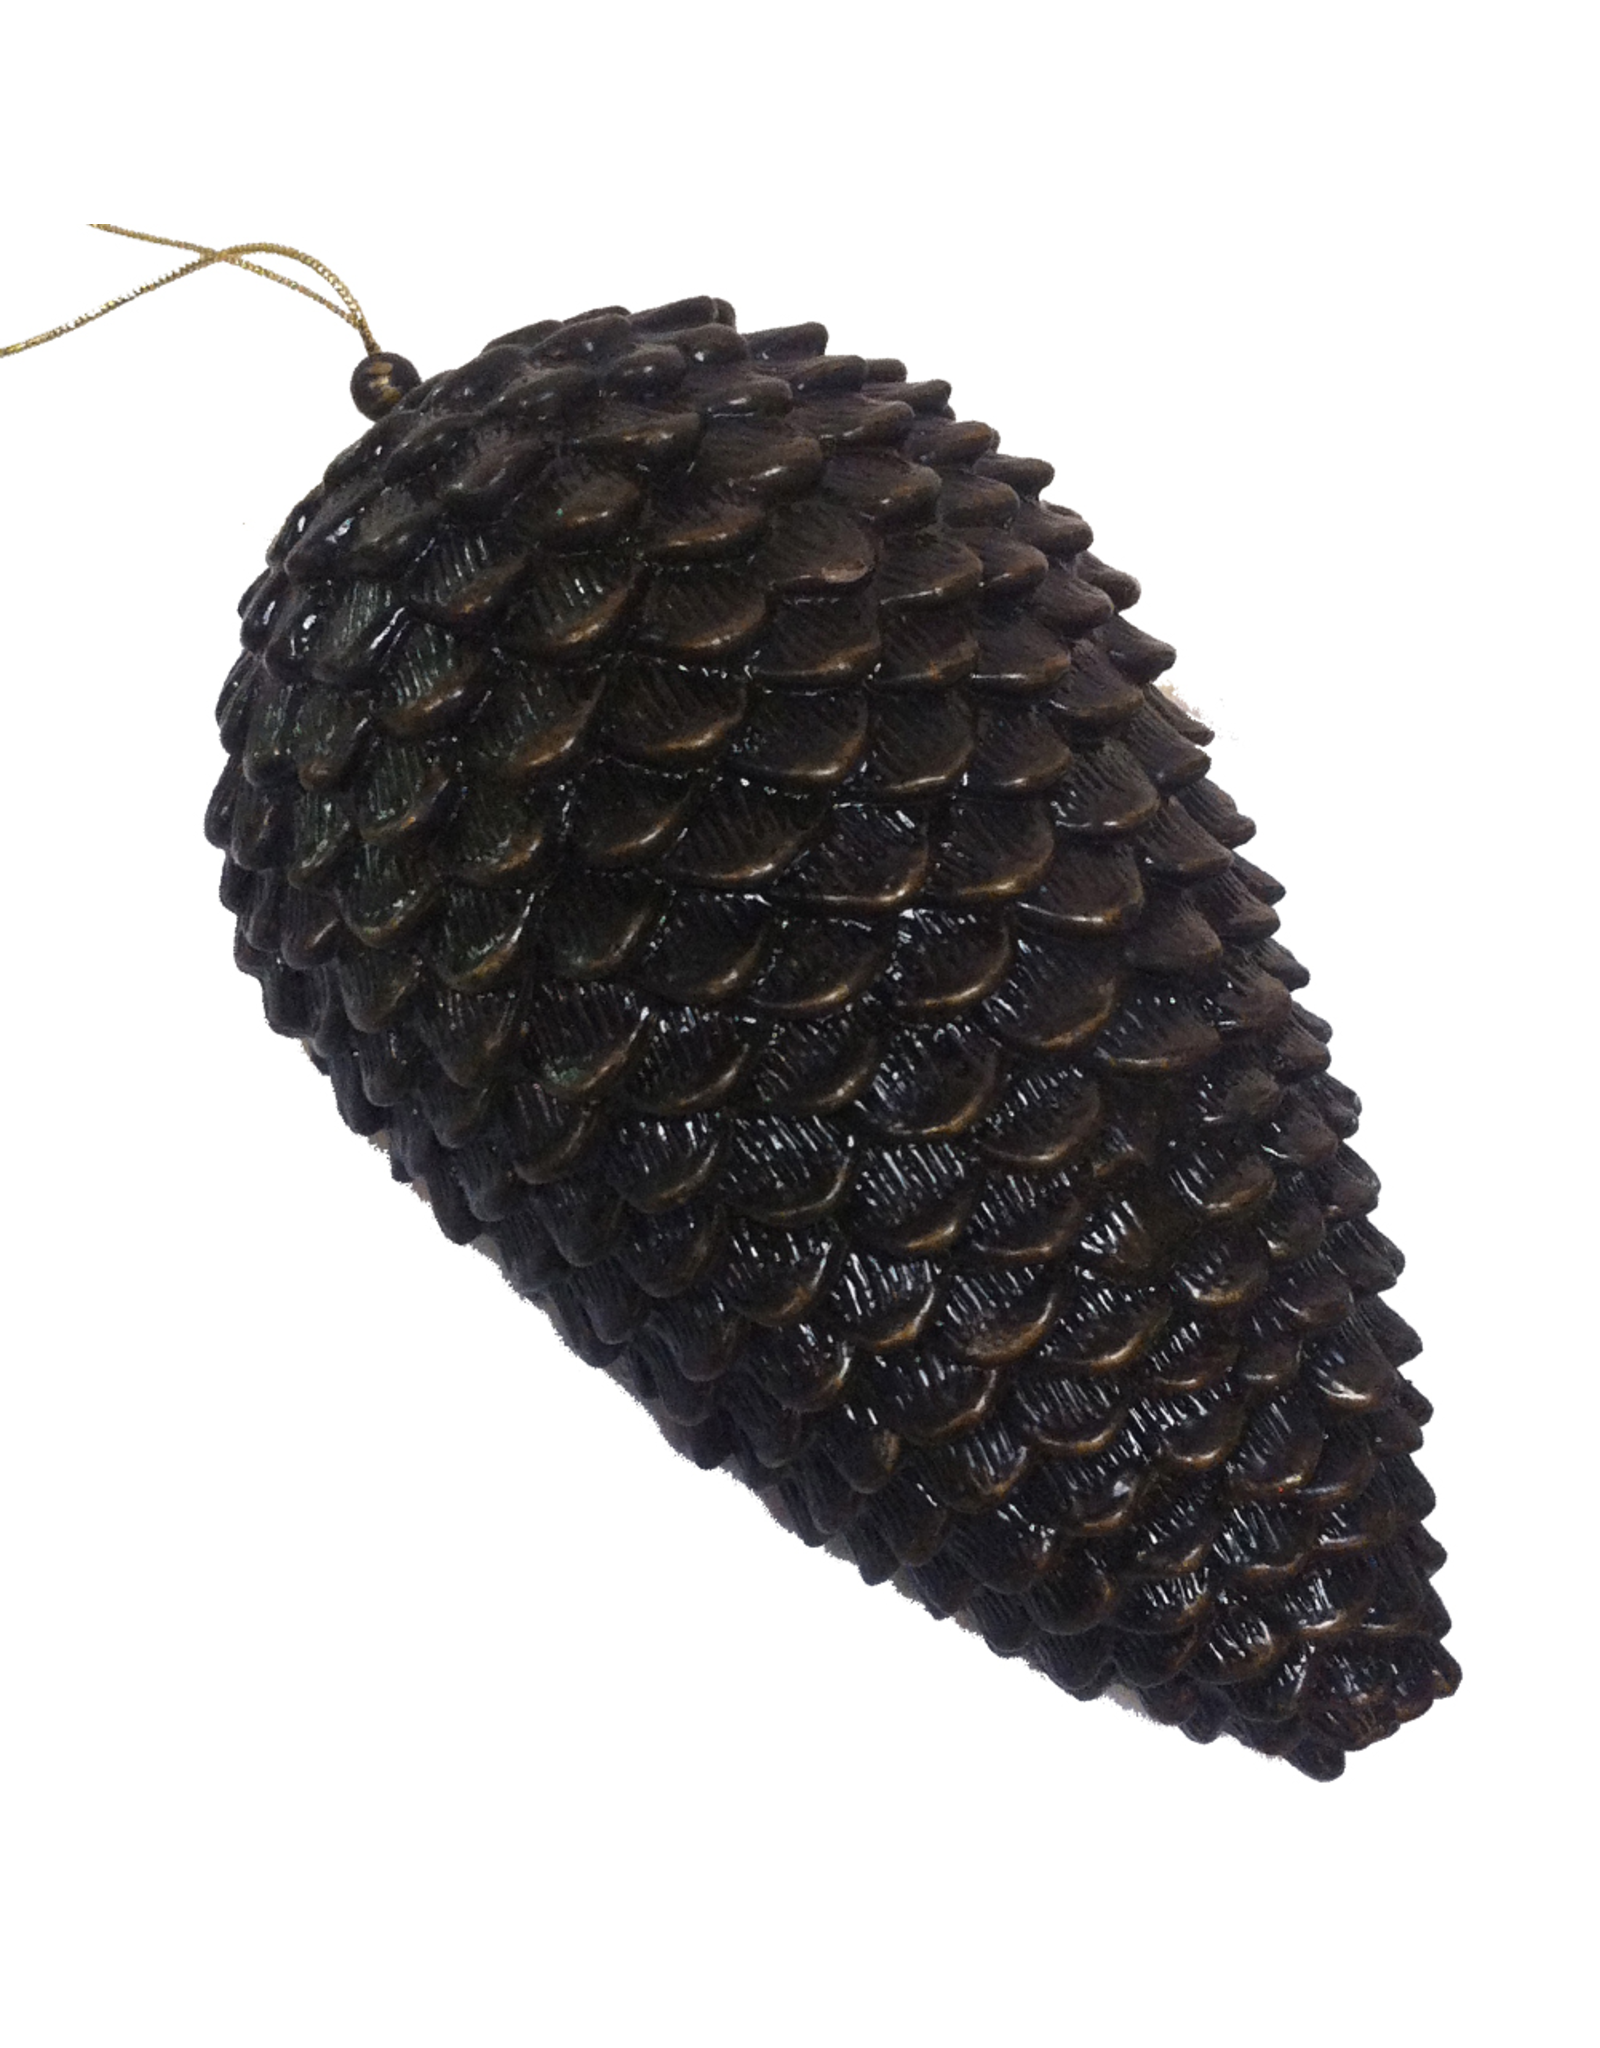 Premier Christmas Antiqued Pinecone Ornament Resin 9.5H inch